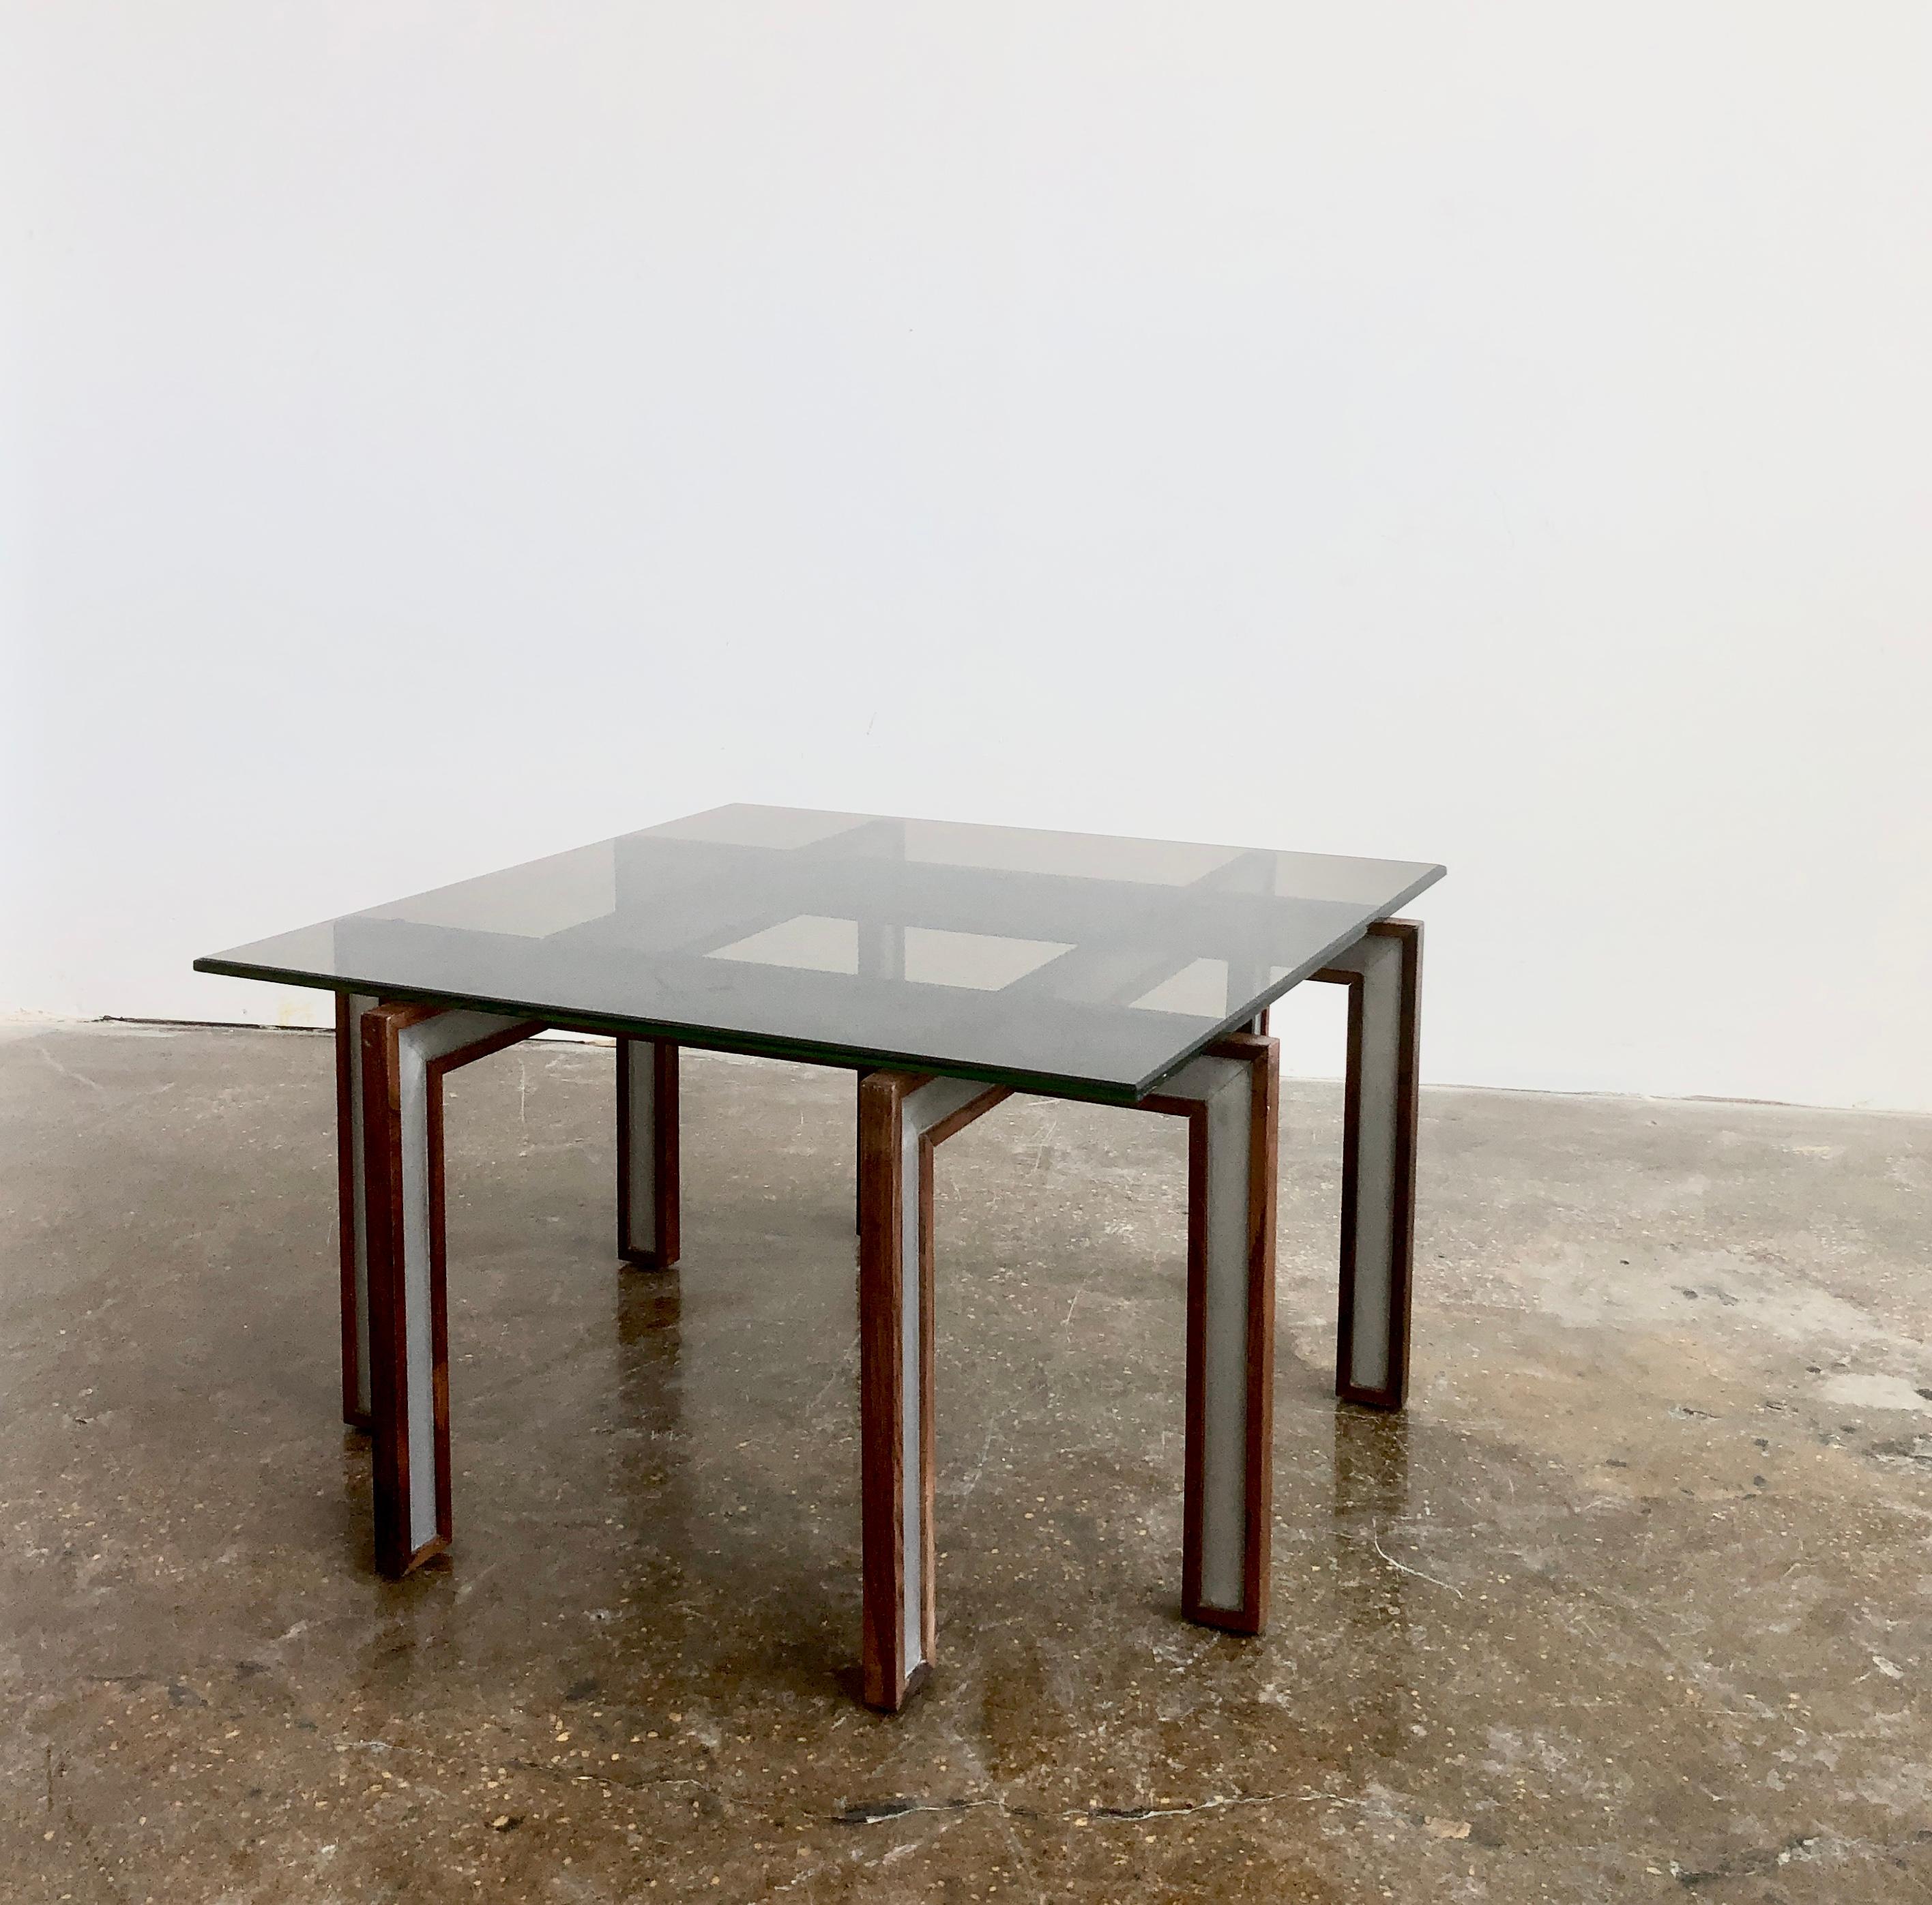 Coffee table of rosewood and metal with smoke glass top. Designed by Henning Korch, manufactured by C.F.C. Silkeborg. Denmark.
Some discoloration on glass top edge.